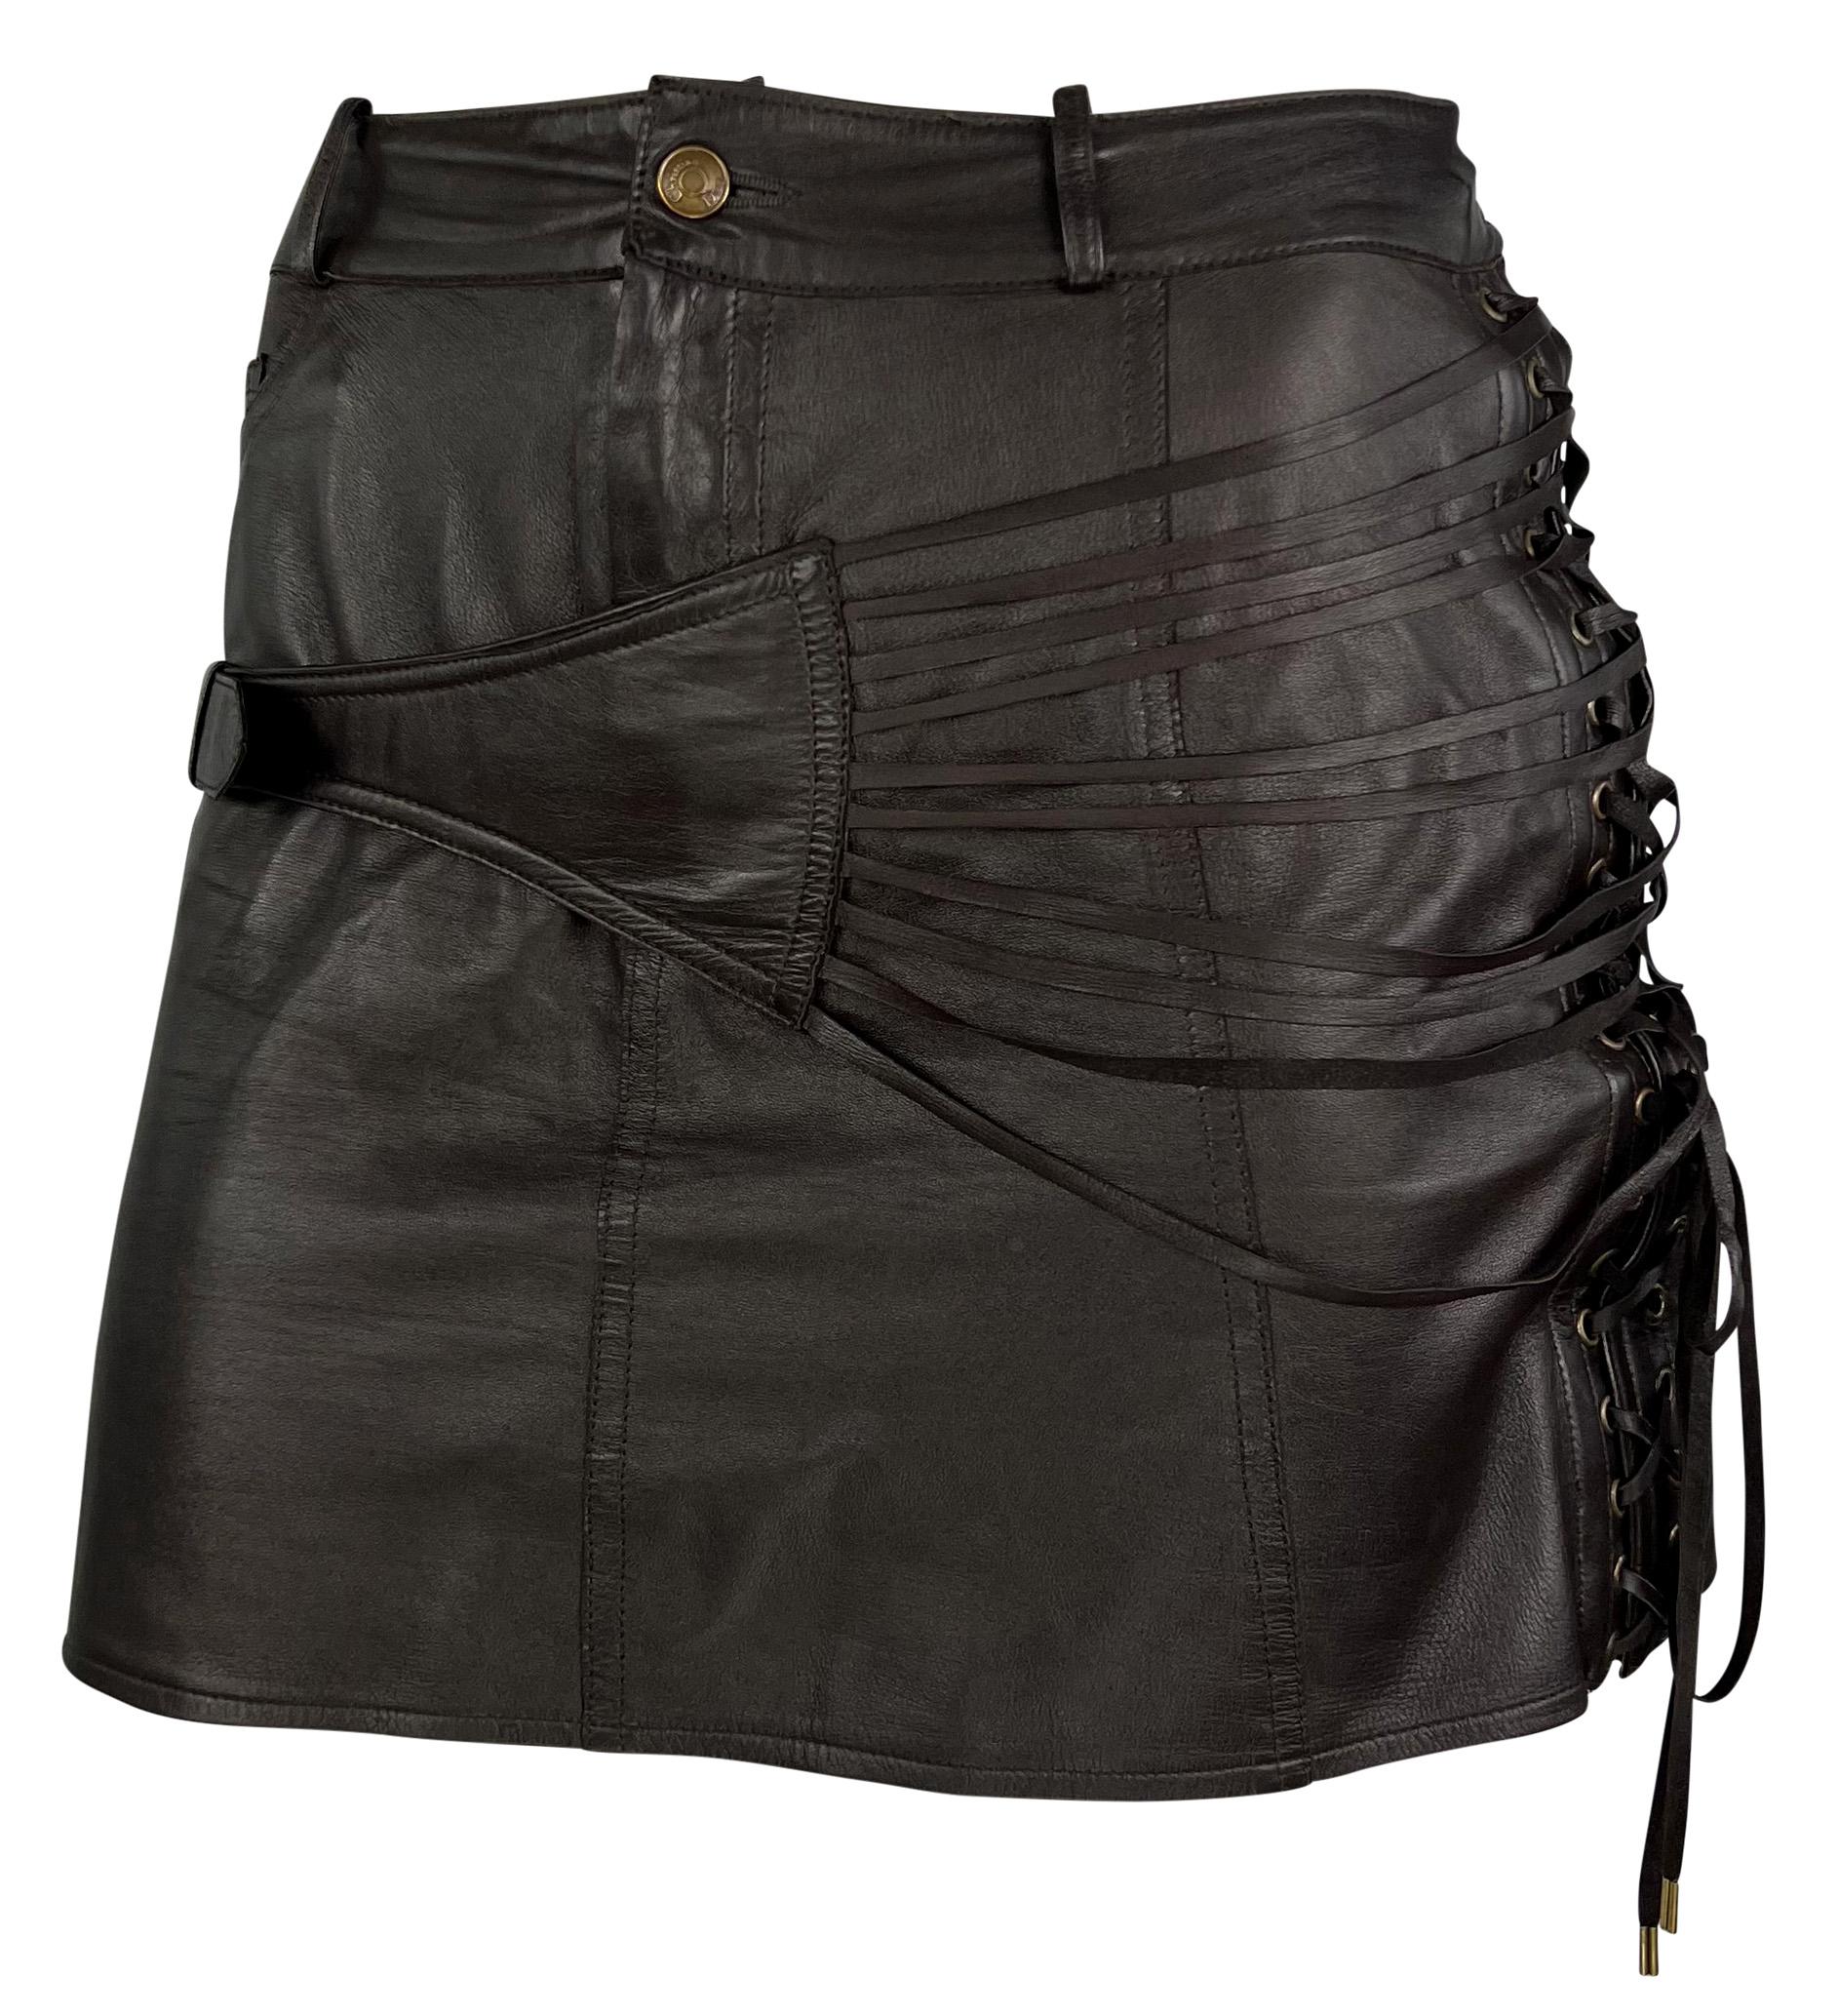 F/W 2002 Christian Dior by John Galliano Leather Lace-Up Asymmetric Mini Skirt In Excellent Condition For Sale In West Hollywood, CA